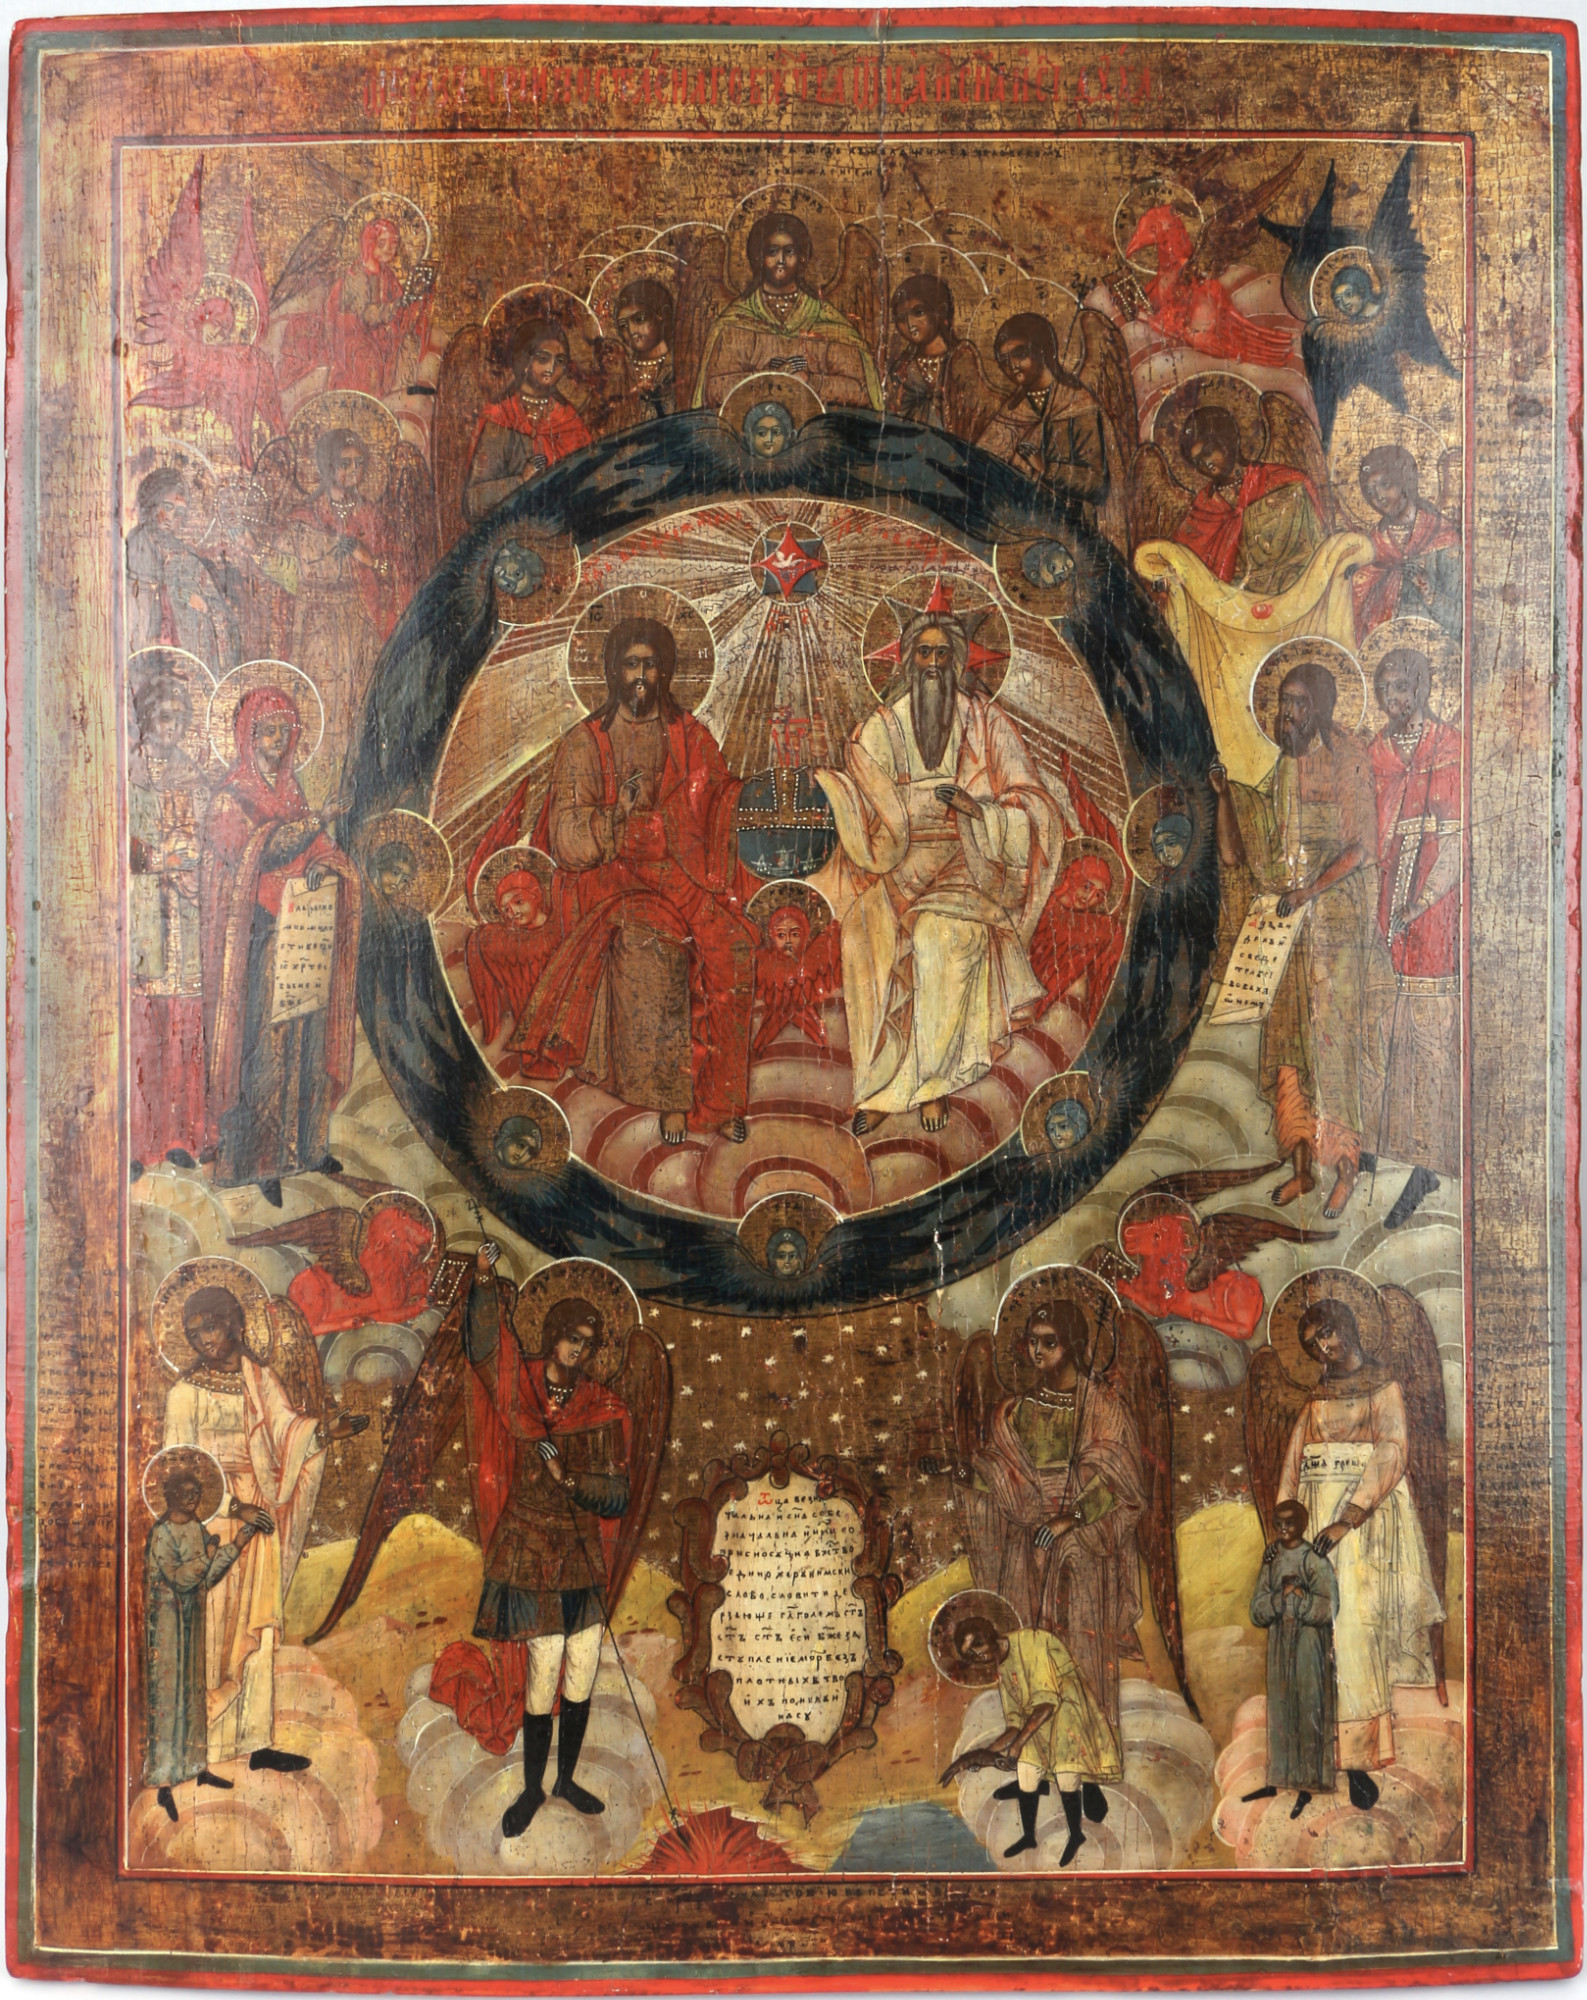 Russia large icon Christ and God the Father as judges of the world 19th century, Russland Ikone Chri